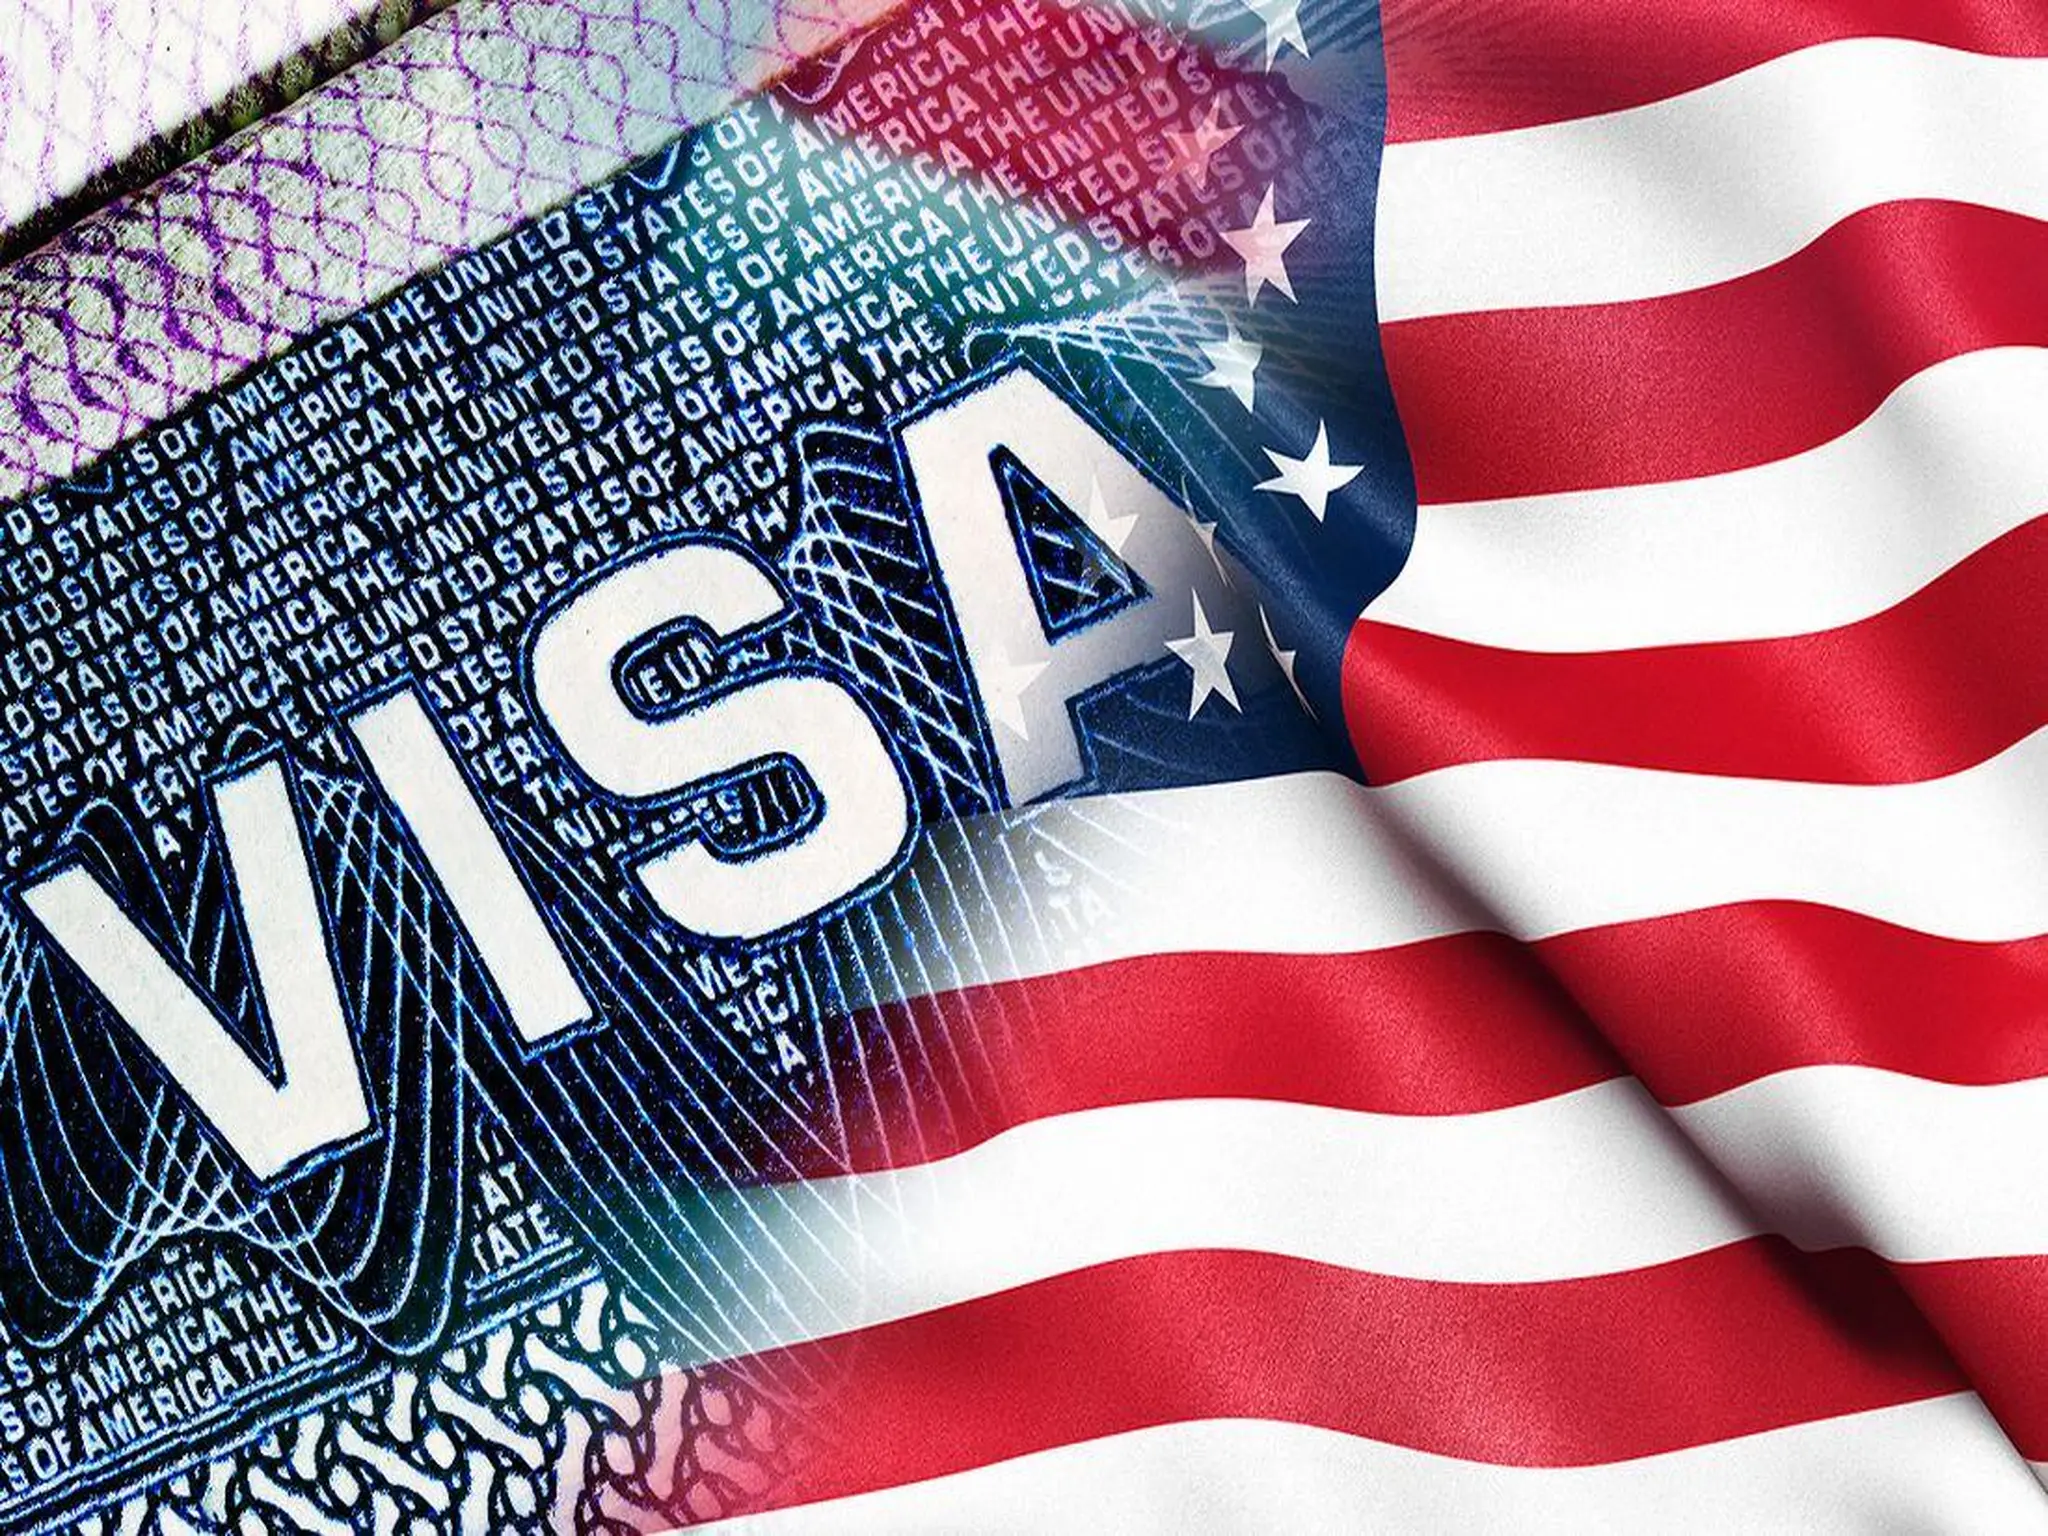 The US Embassy in the UAE issued a new decision regarding USA visa appointments